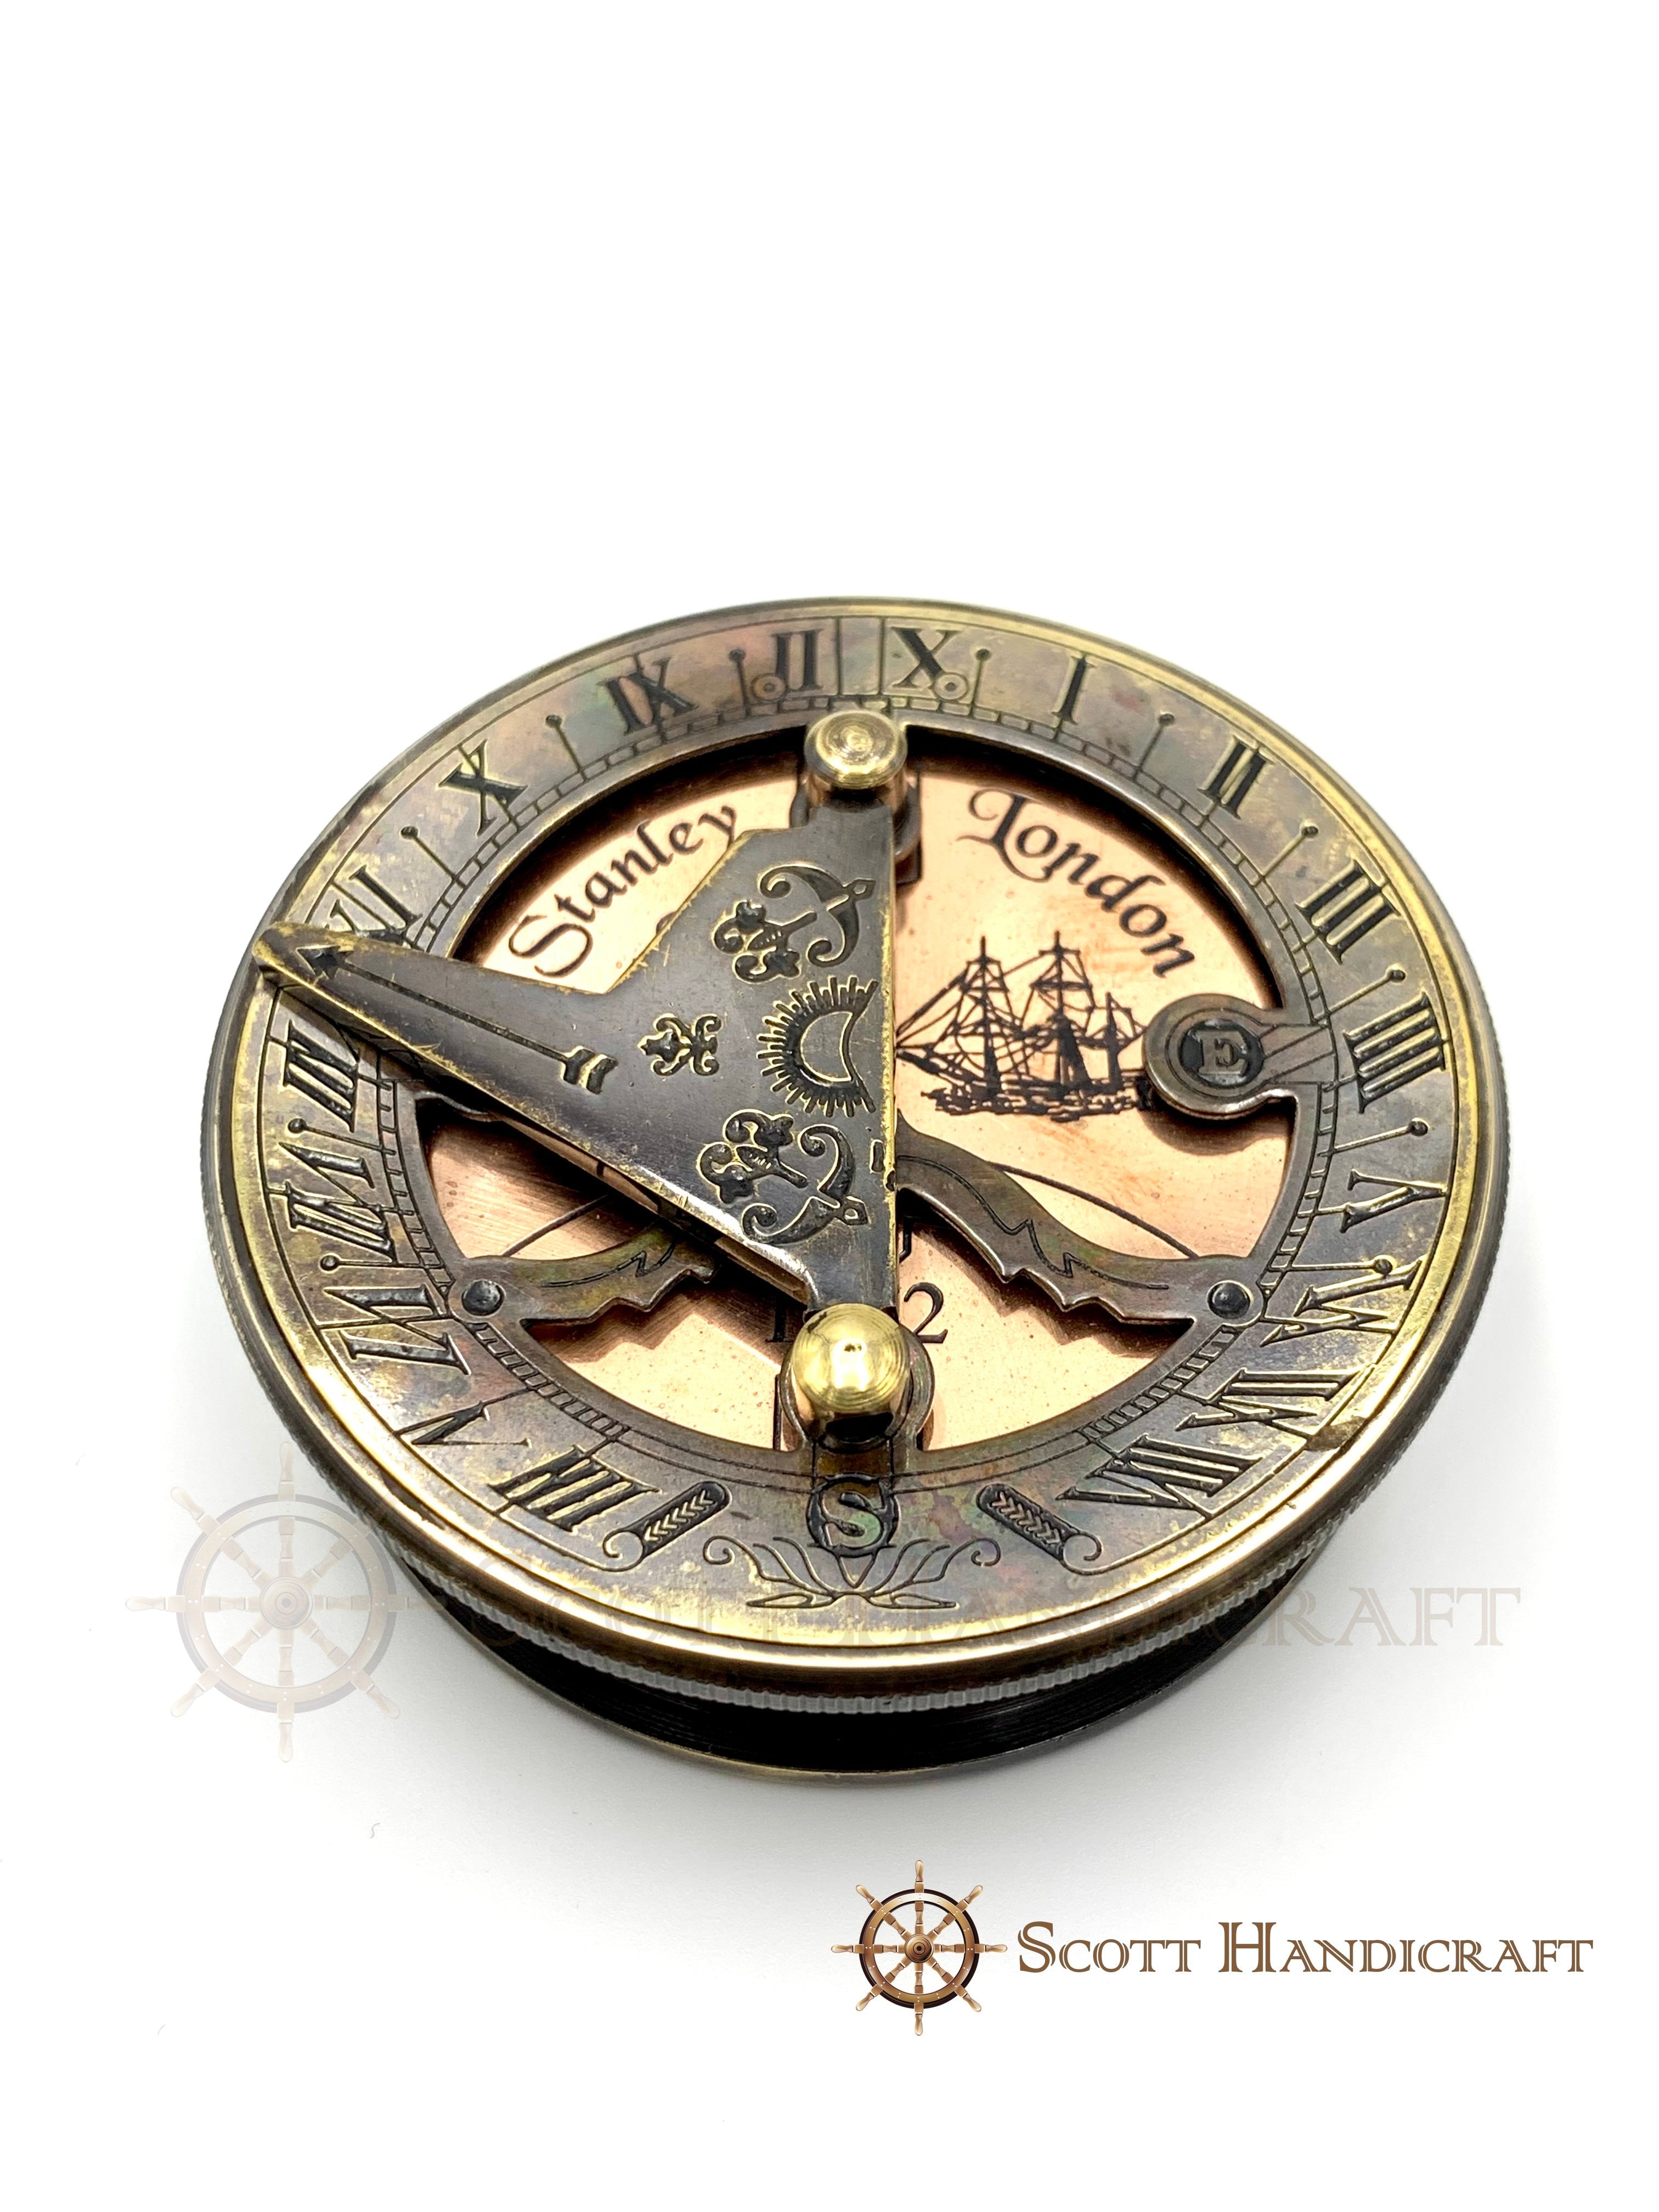 Beautifully Handcrafted Stanley London Replica sundial compass with wooden box